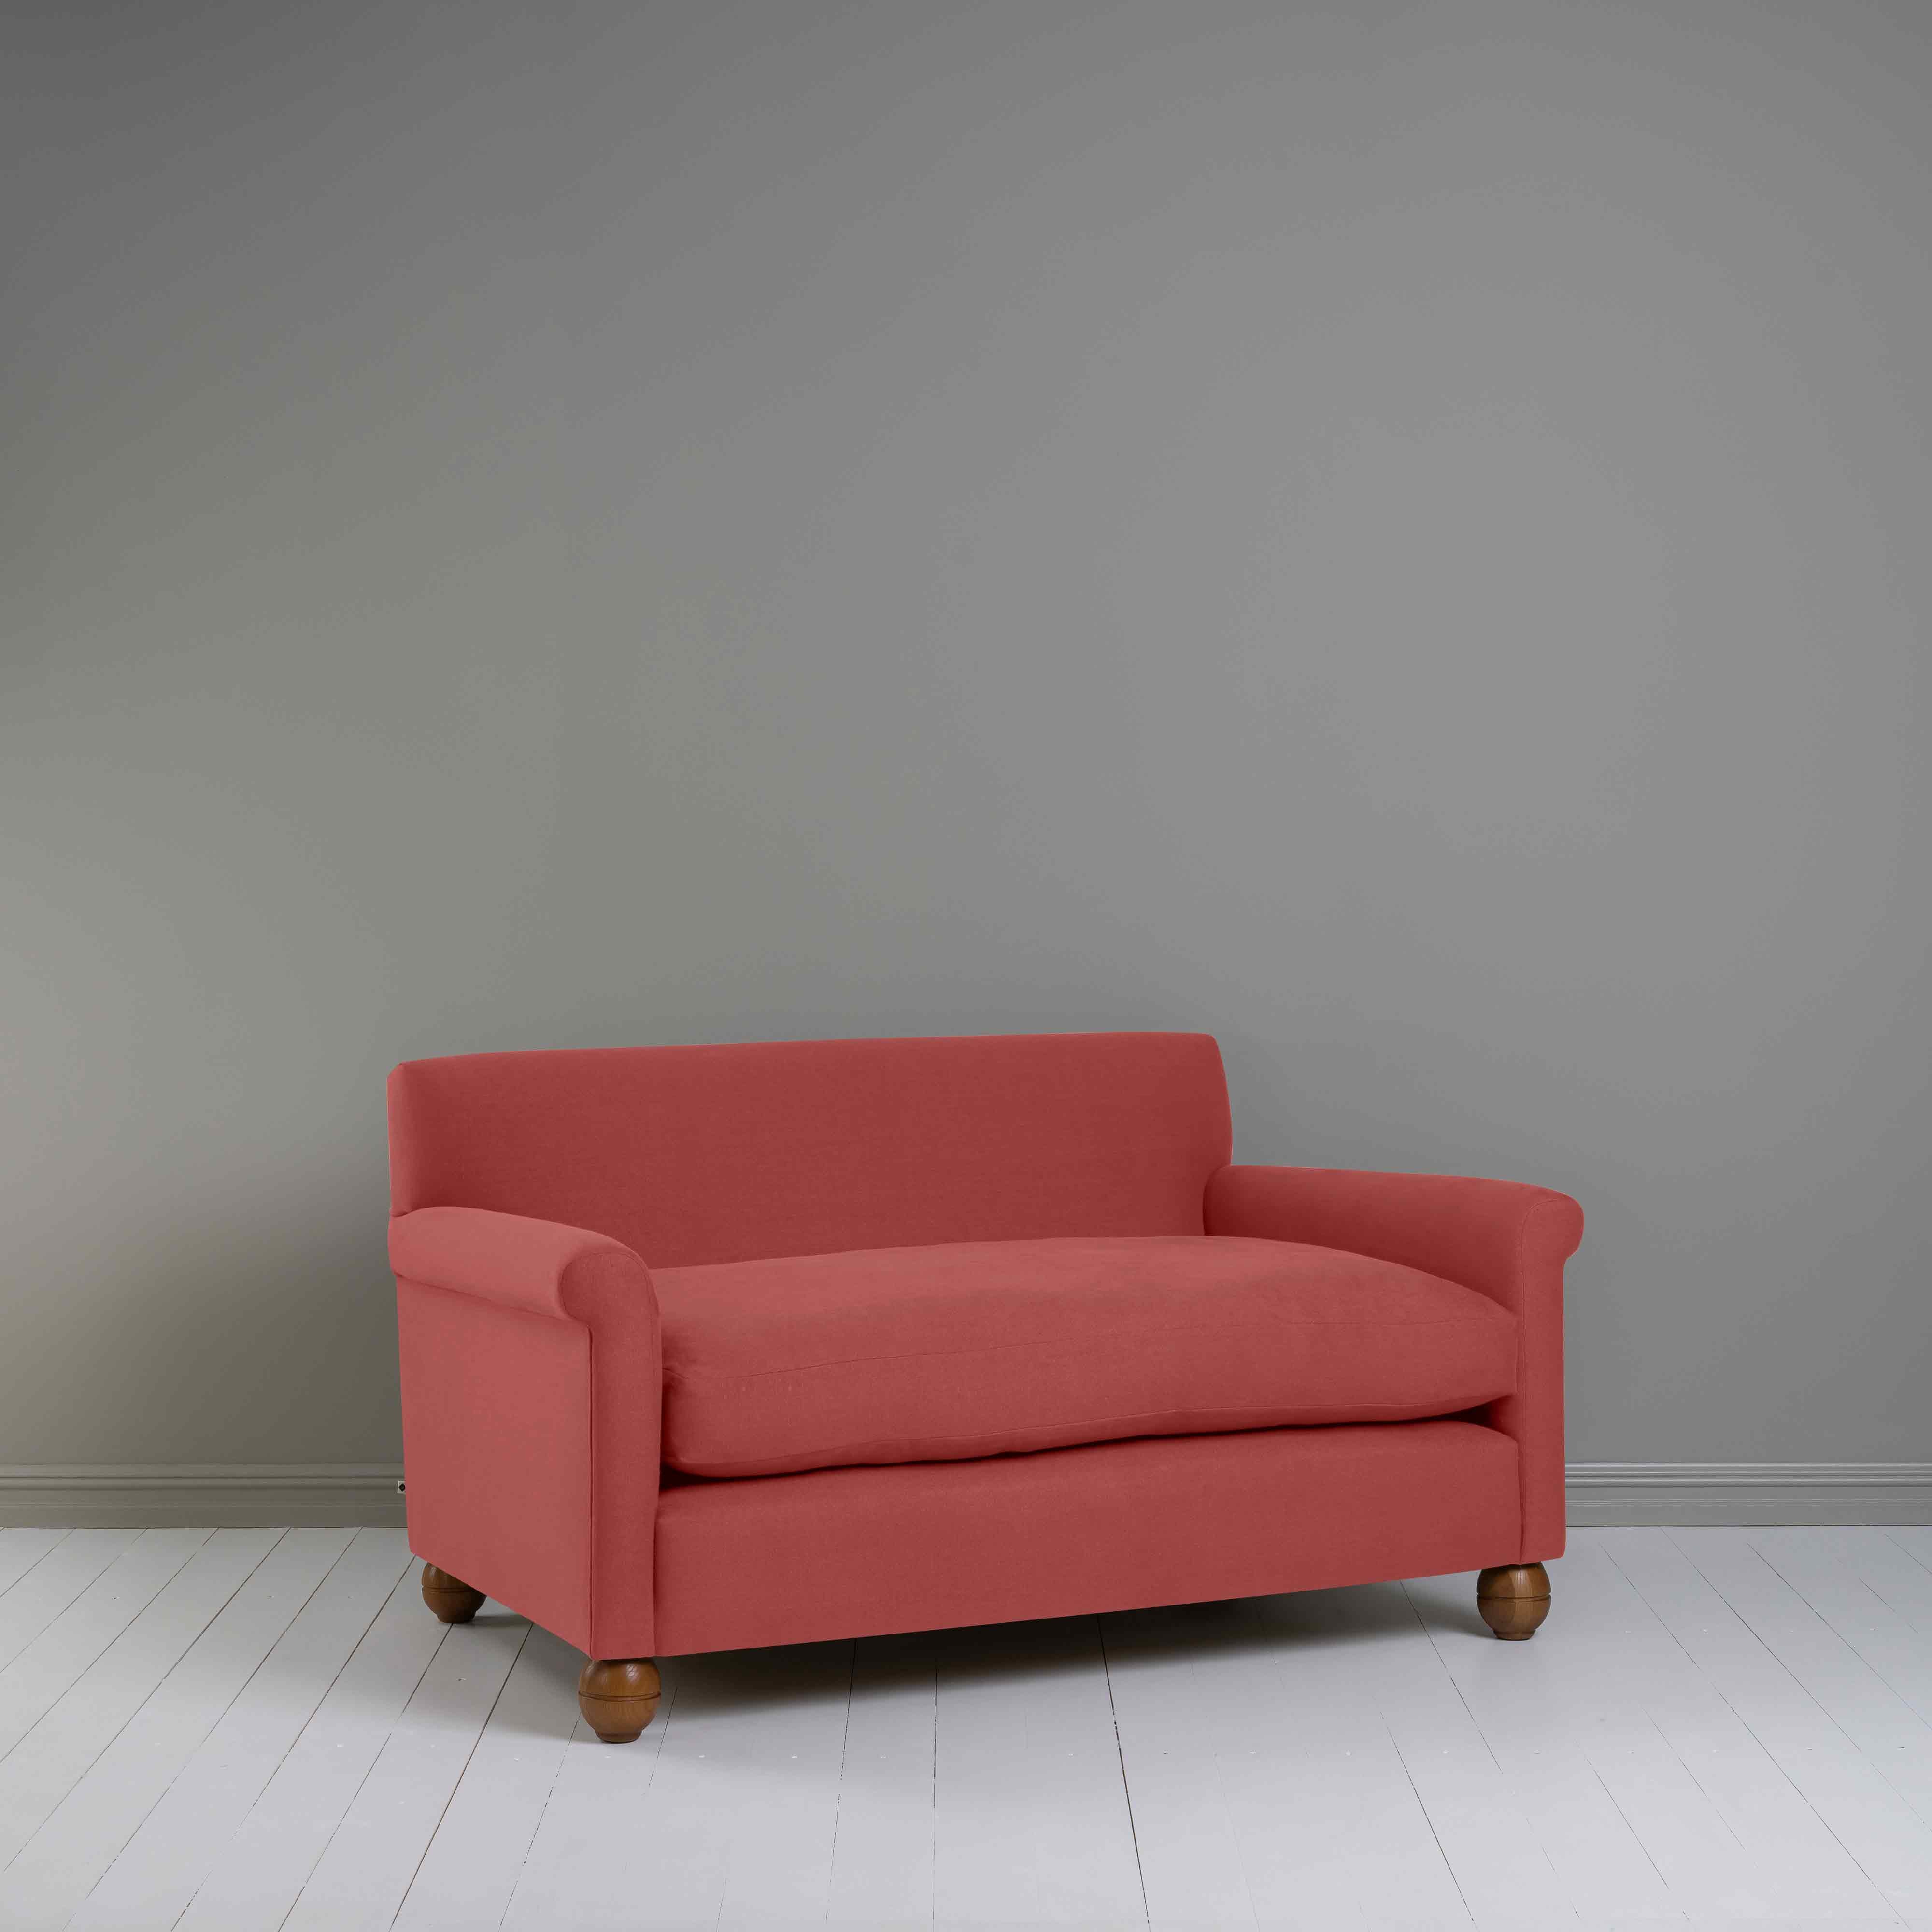  Idler 2 Seater Sofa in Laidback Linen Rouge 